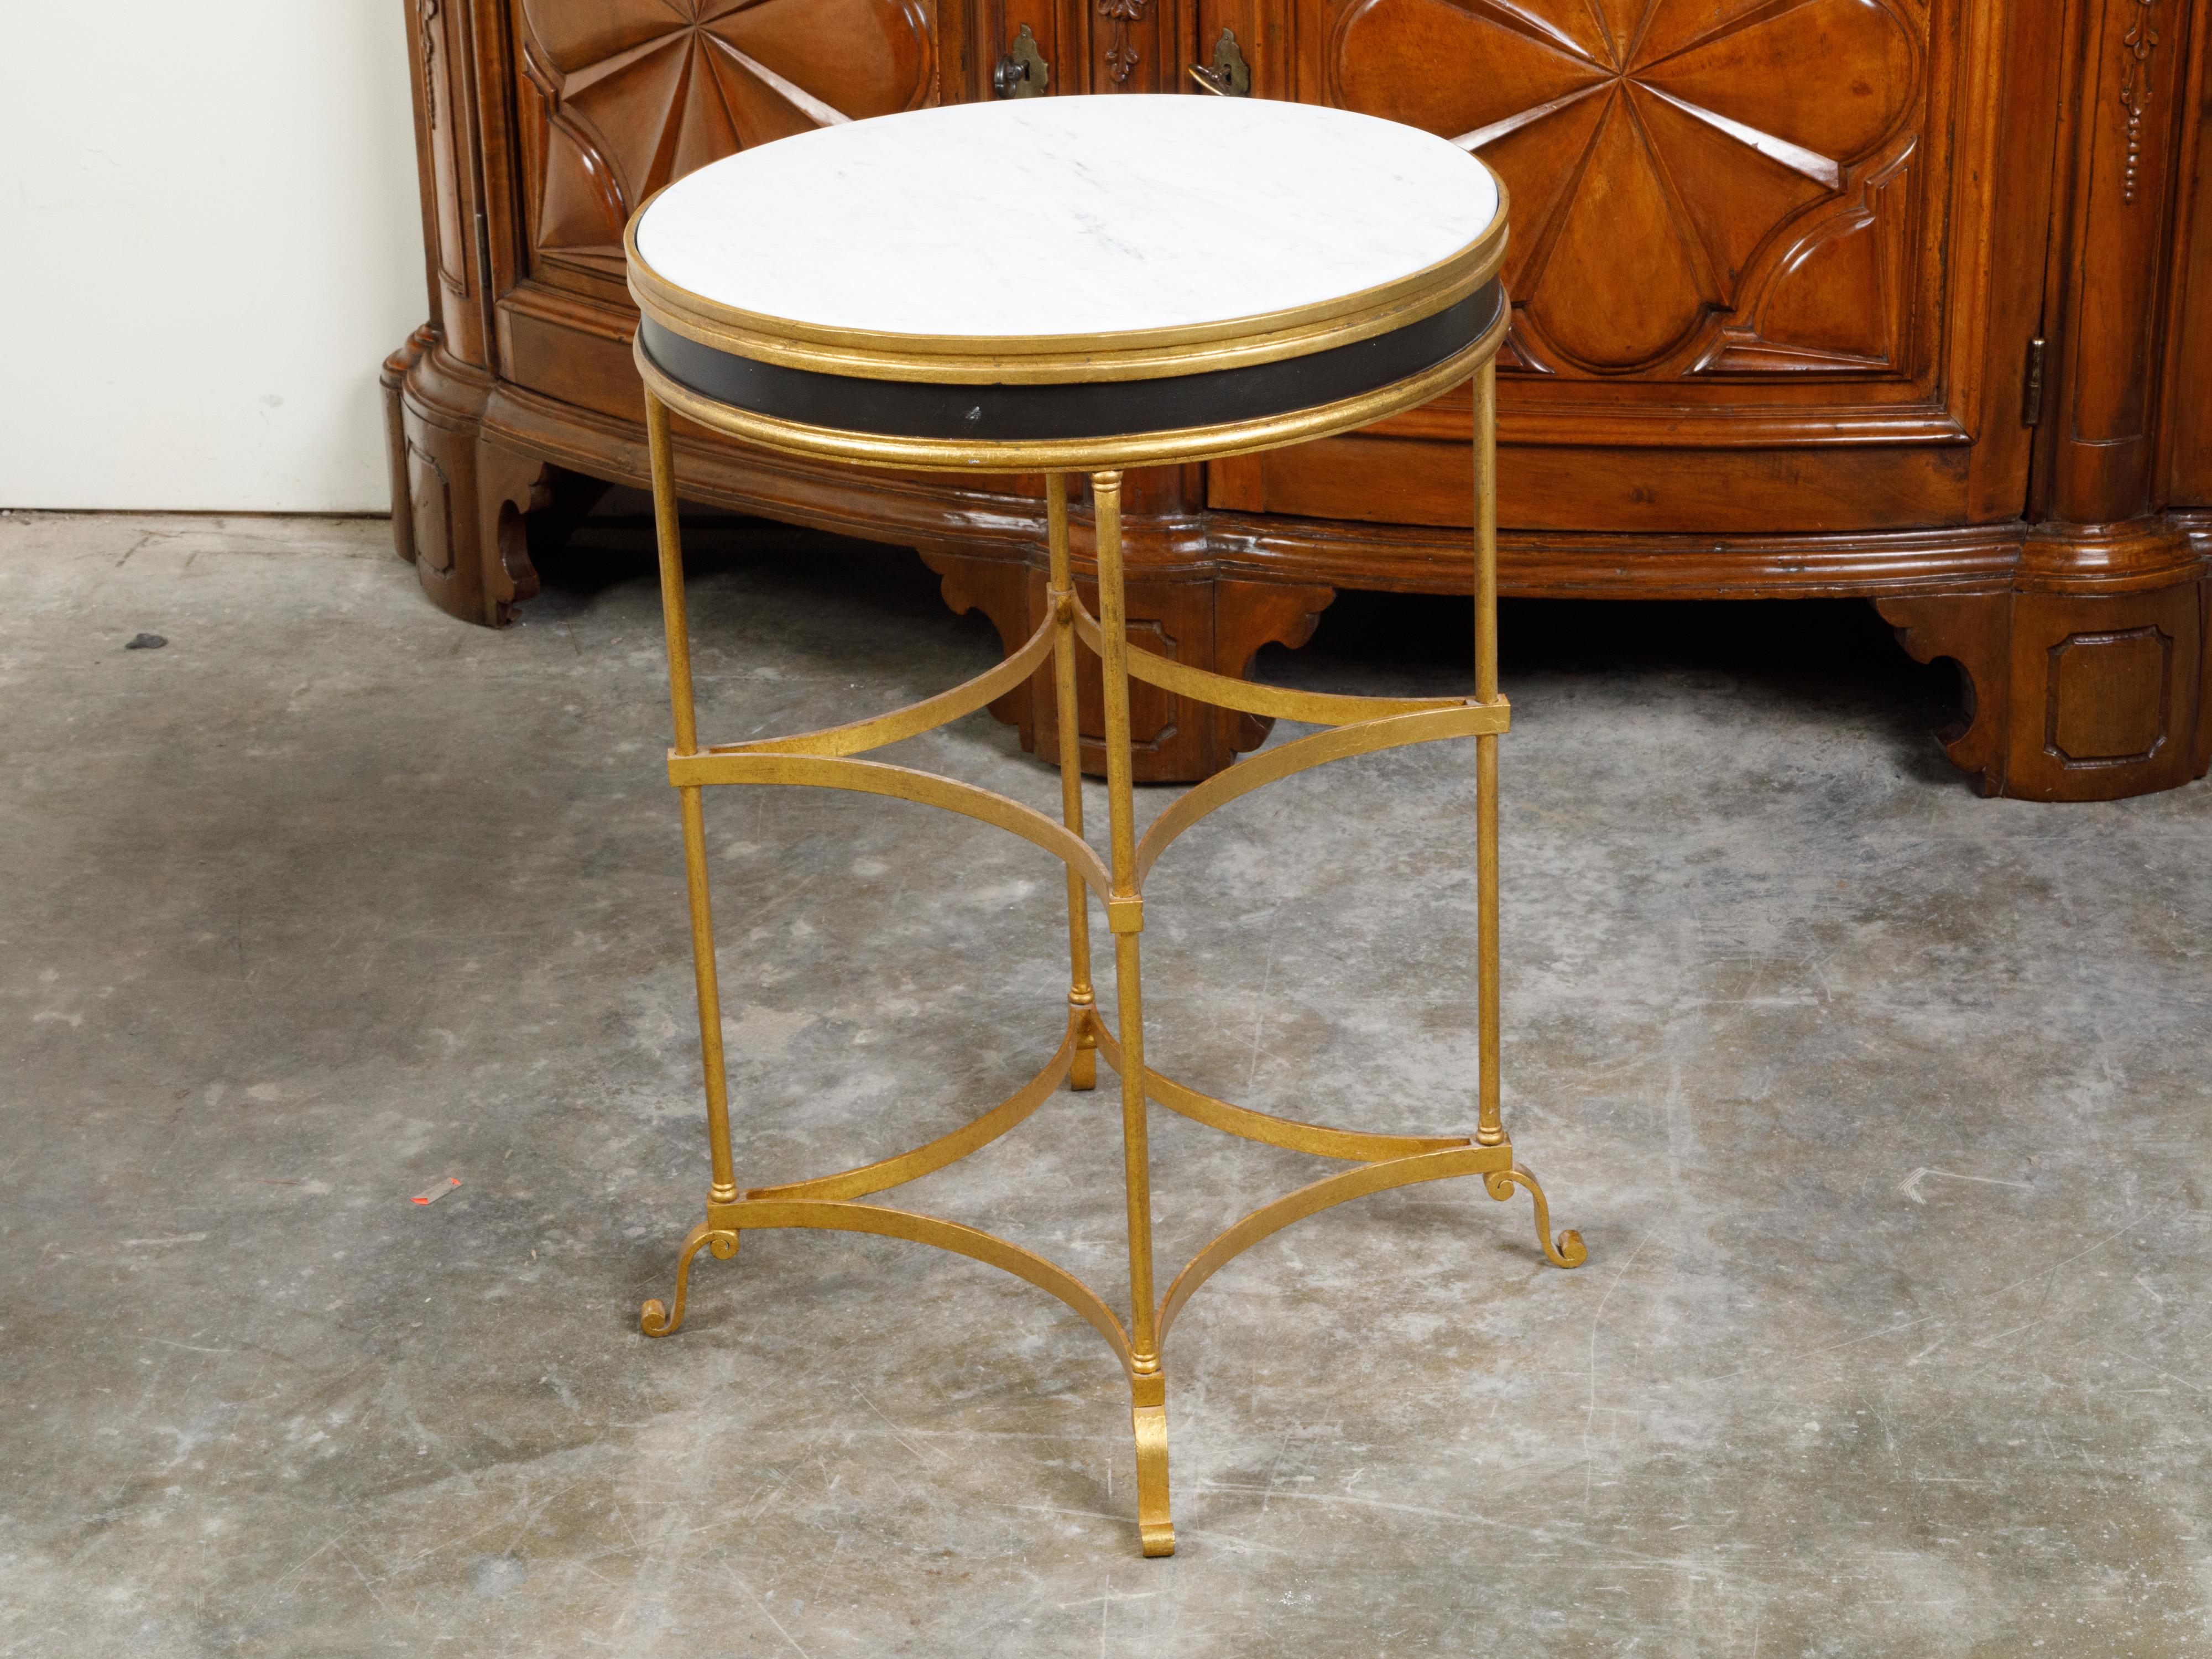 Italian Midcentury Gilt Metal Table with Marble Top and In-Curving Stretchers For Sale 5